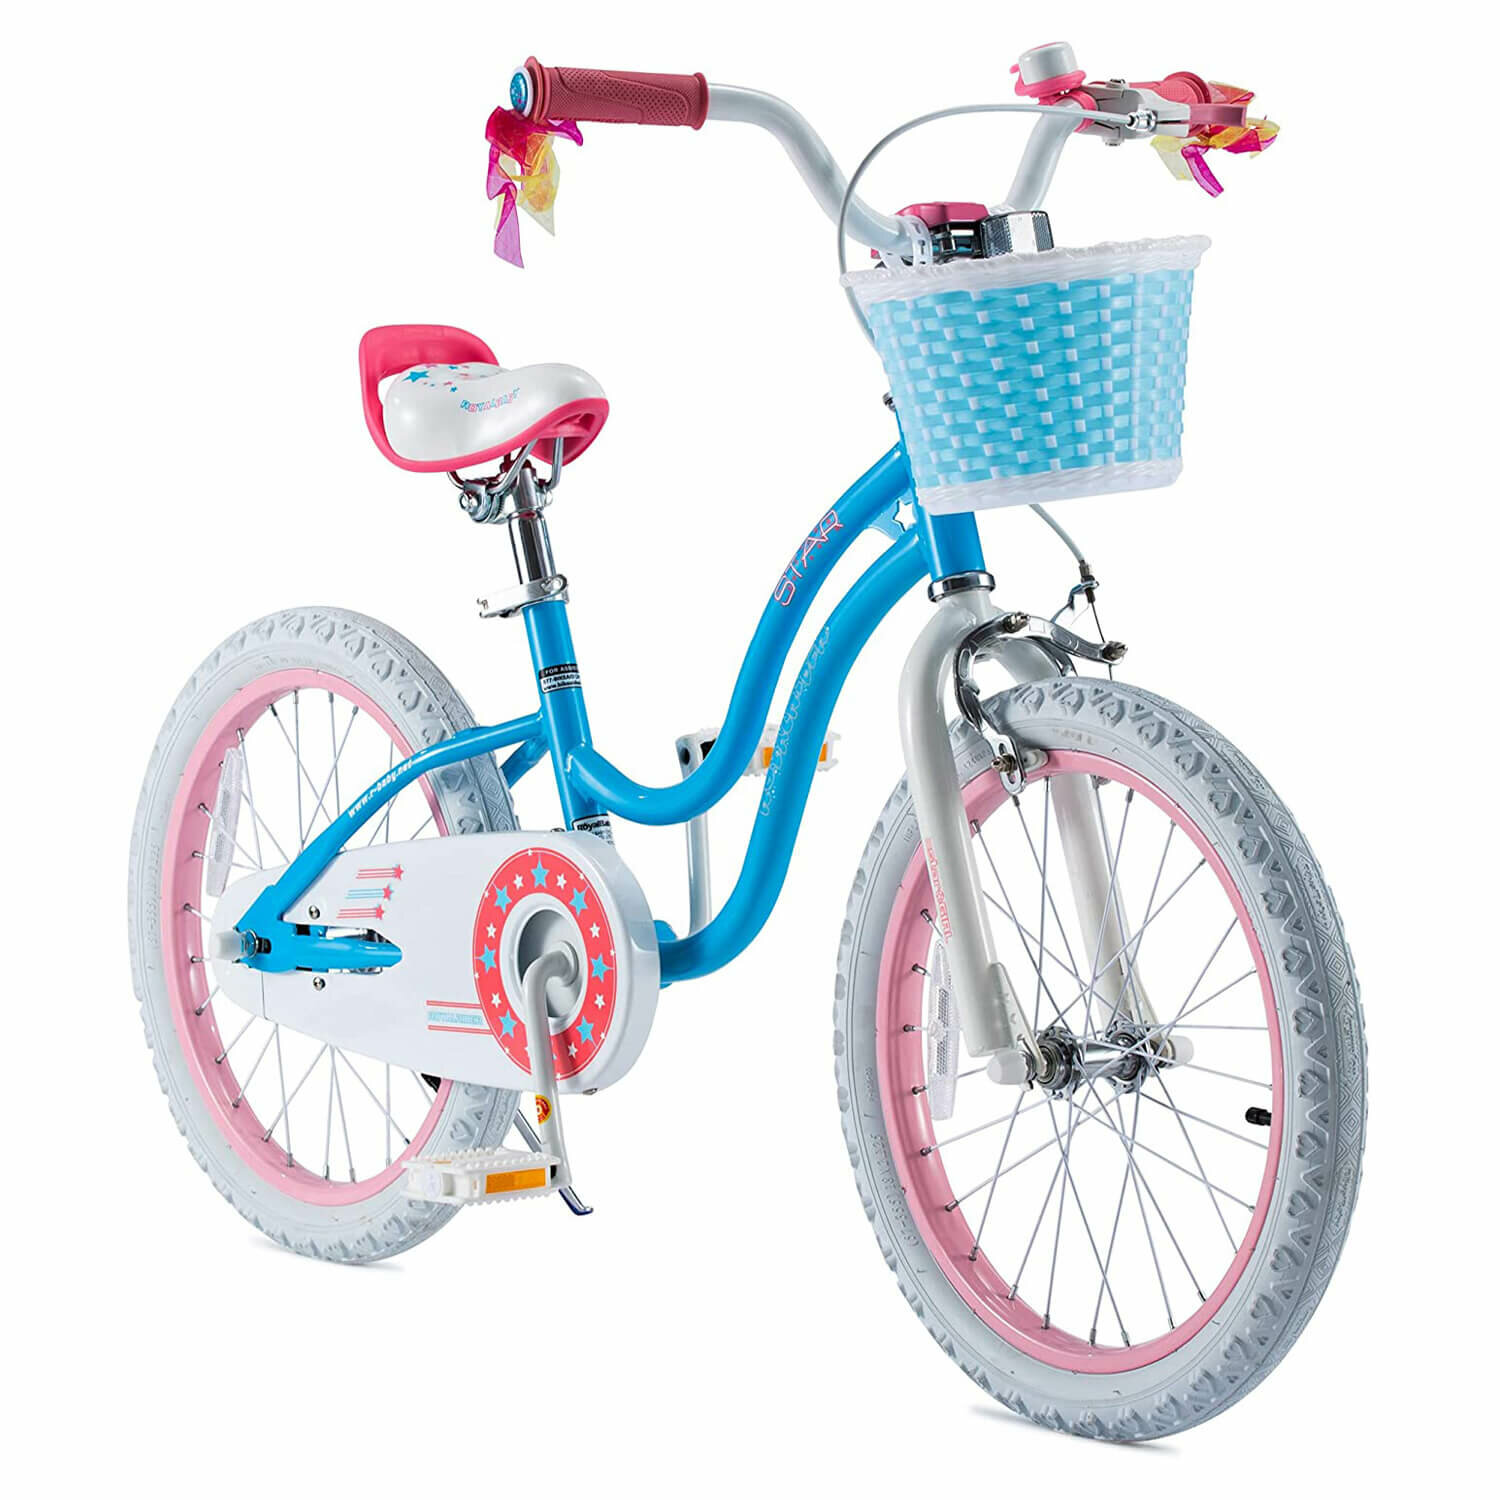 [EU Direct] ROYALBABY STARGIRL 18 Inch Children's Bike Two Brake System Kids Bicycle With Kickstands For 5~9 Years Stabi